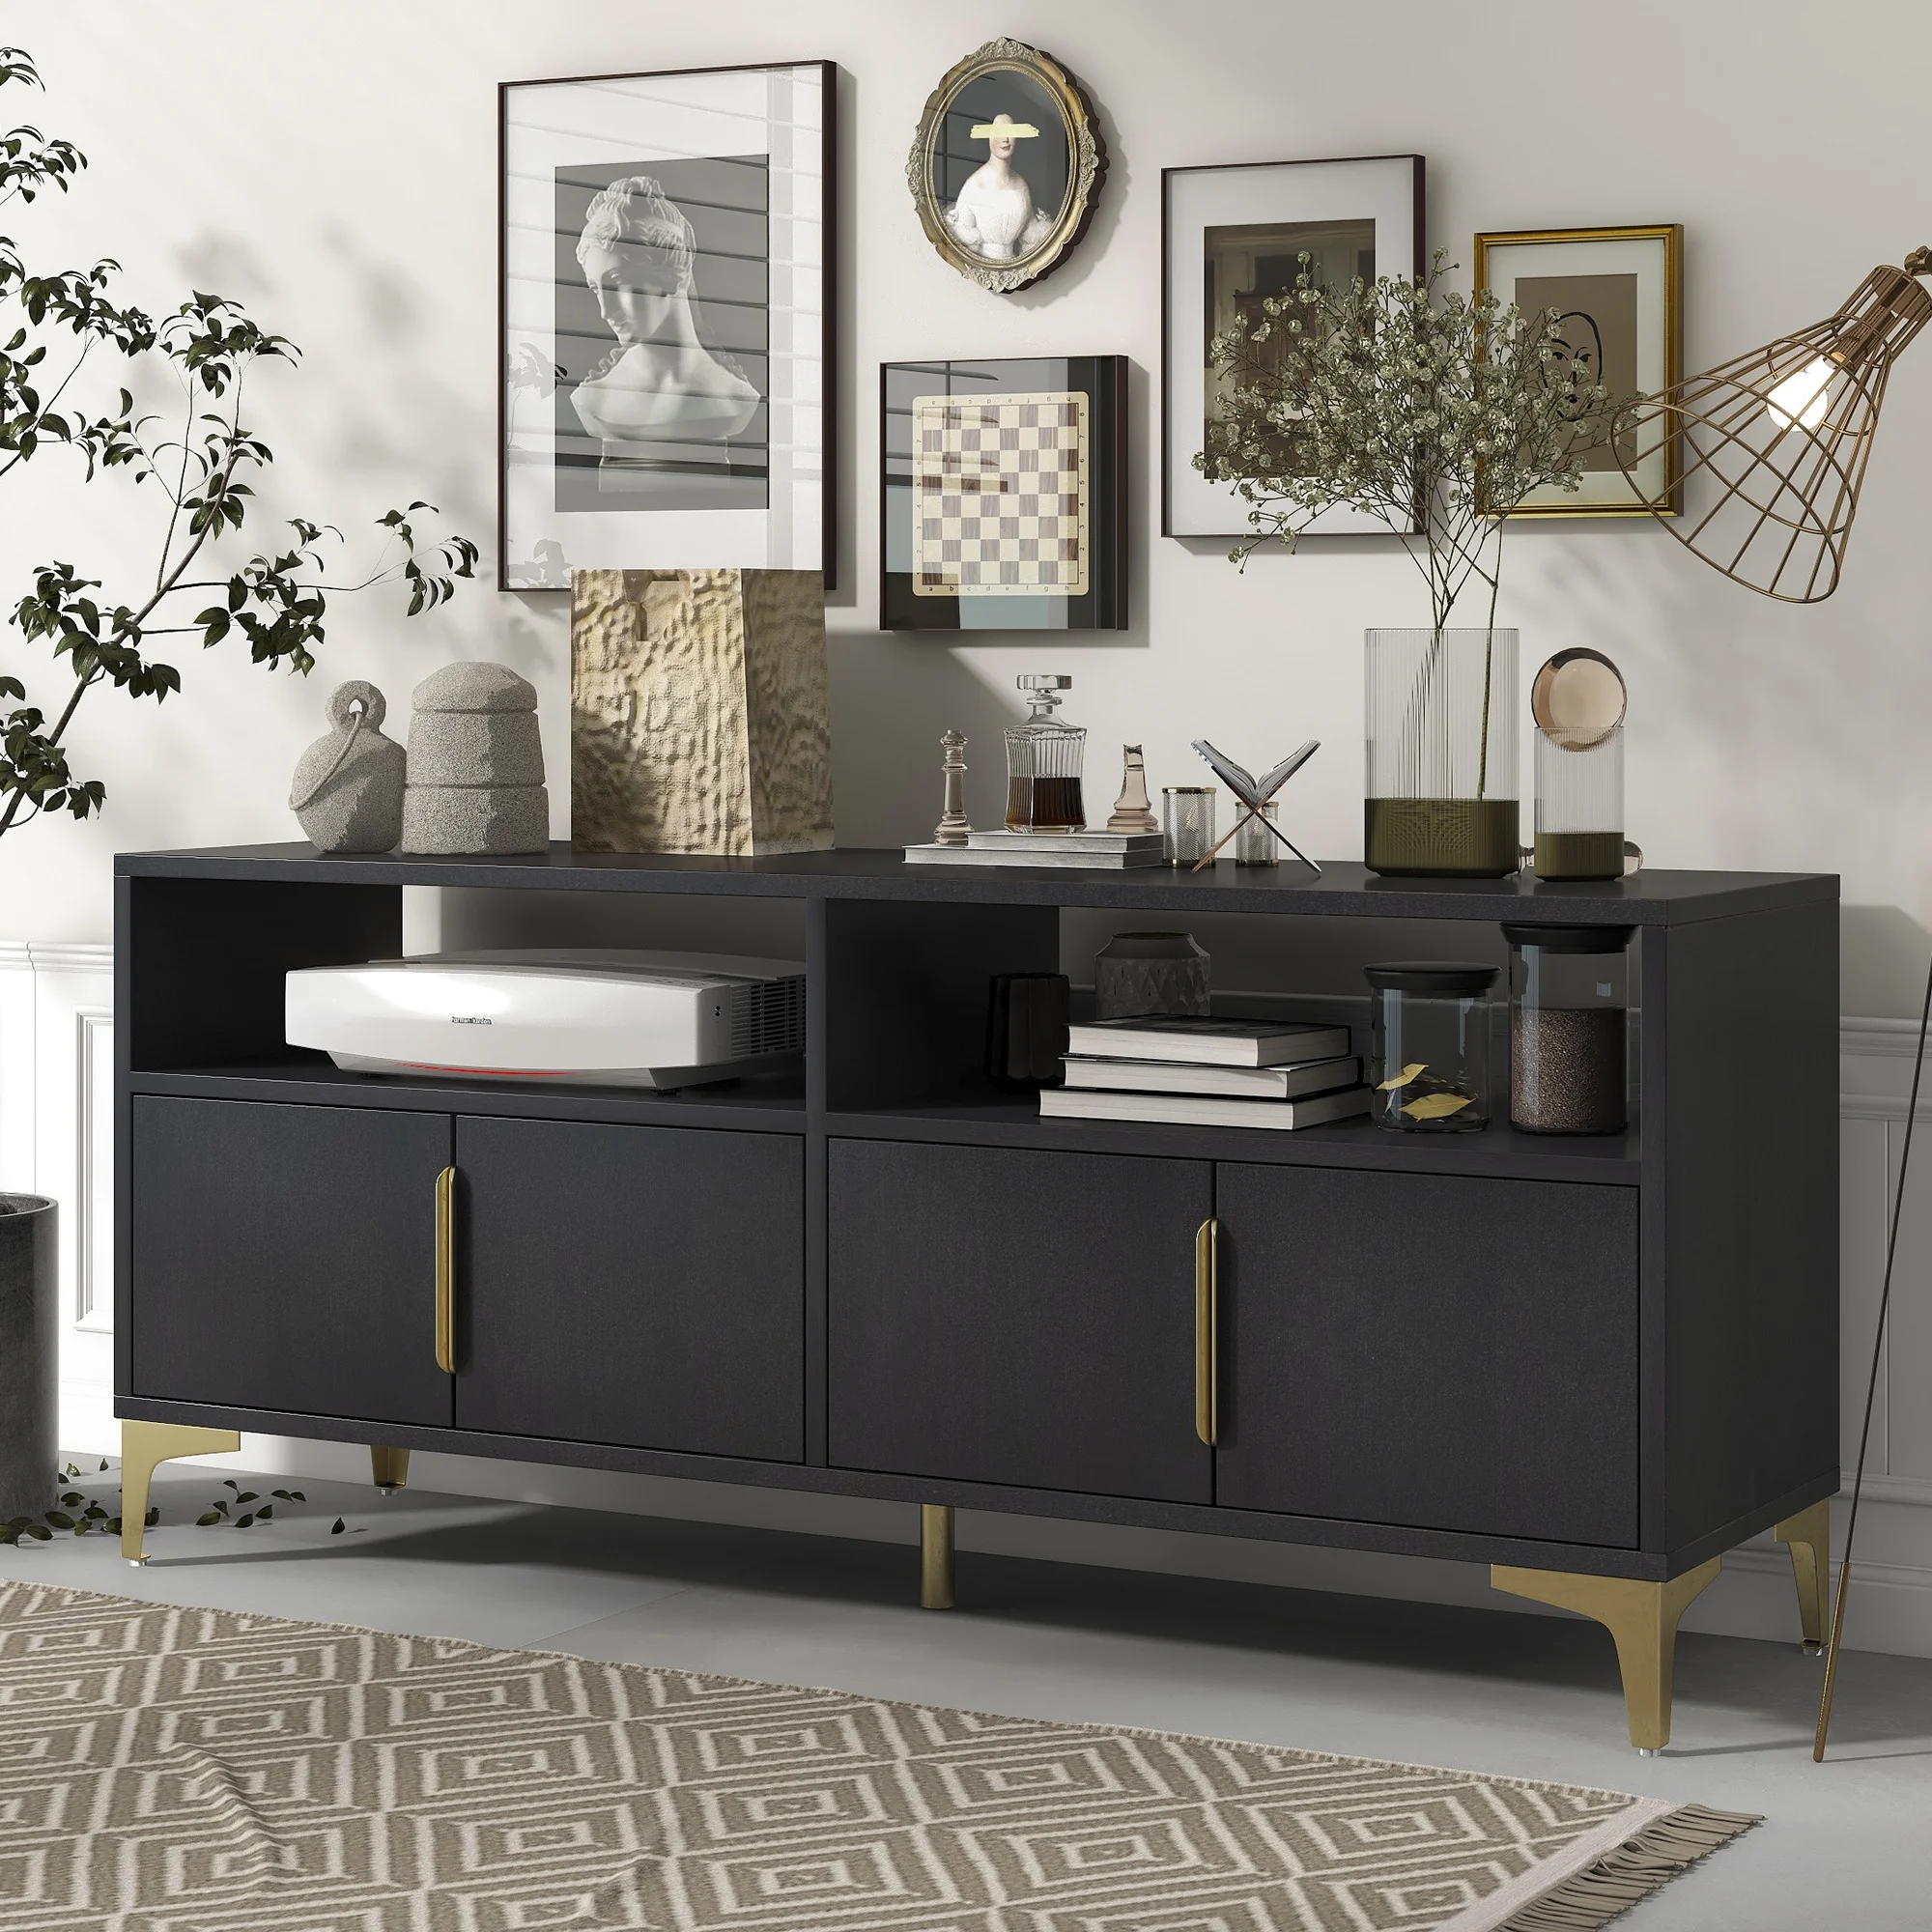 

58” L Sideboard with Gold Metal Legs and Handles Sufficient Storage Space Magnetic Suction Doors (Espresso)